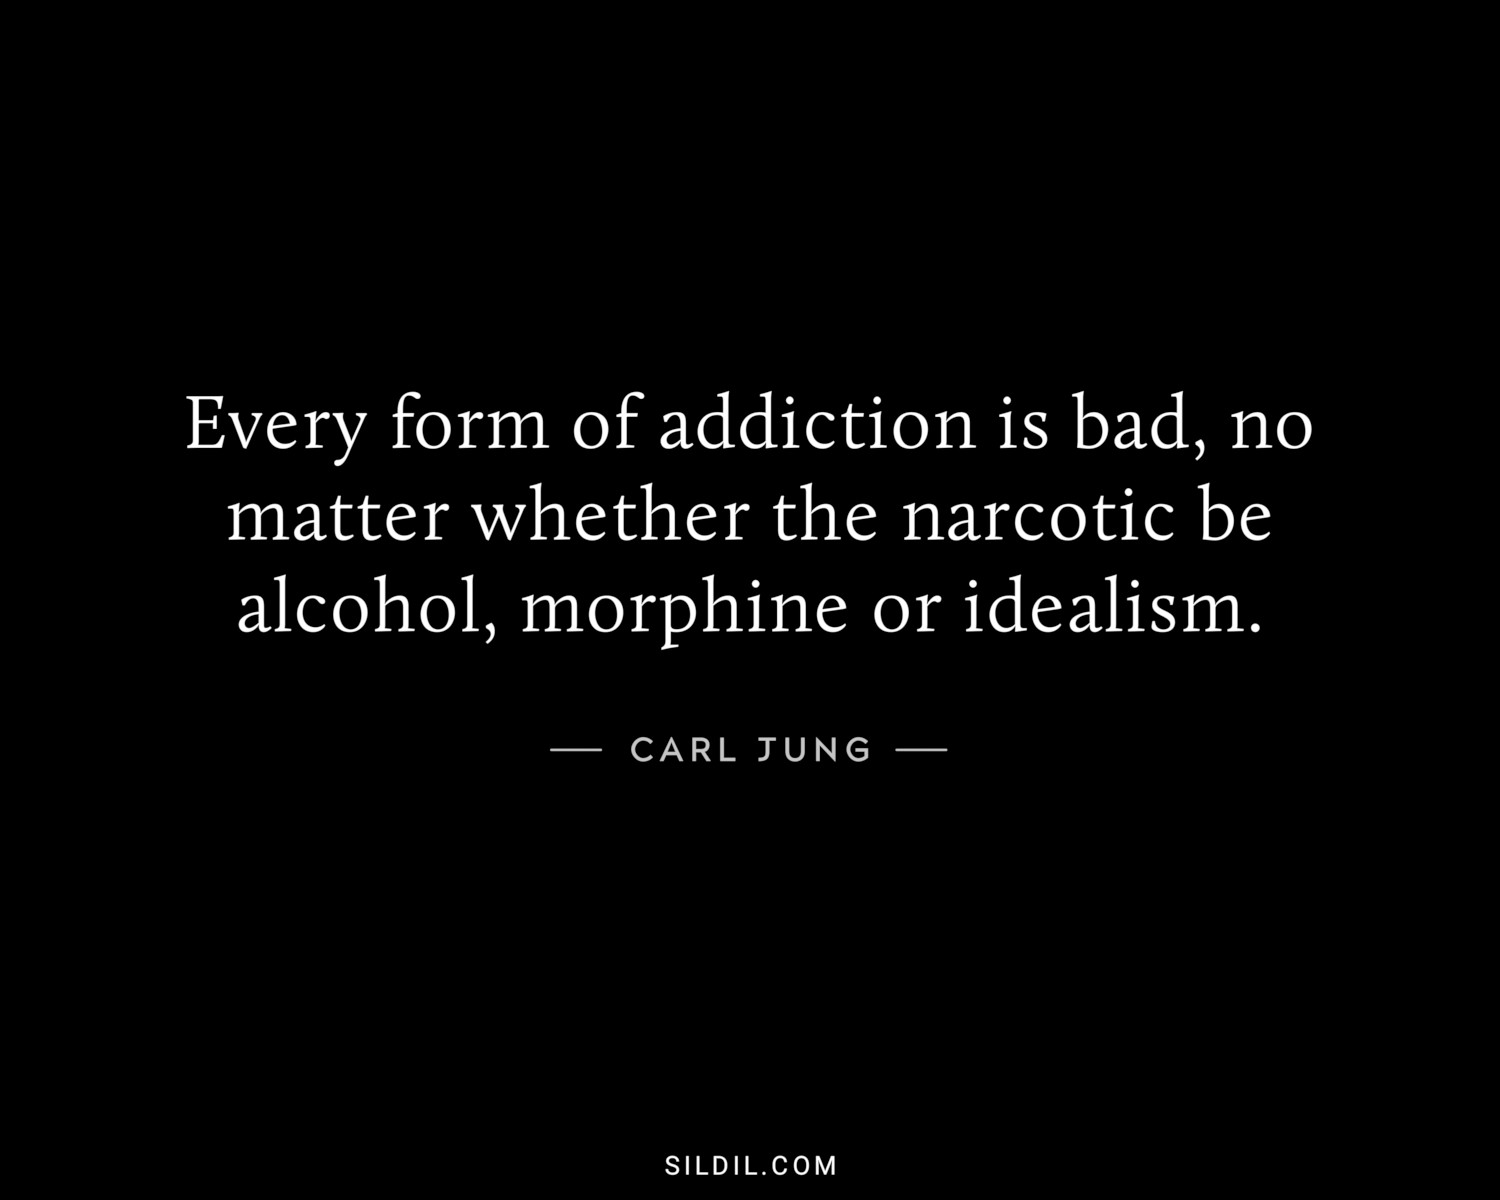 Every form of addiction is bad, no matter whether the narcotic be alcohol, morphine or idealism.